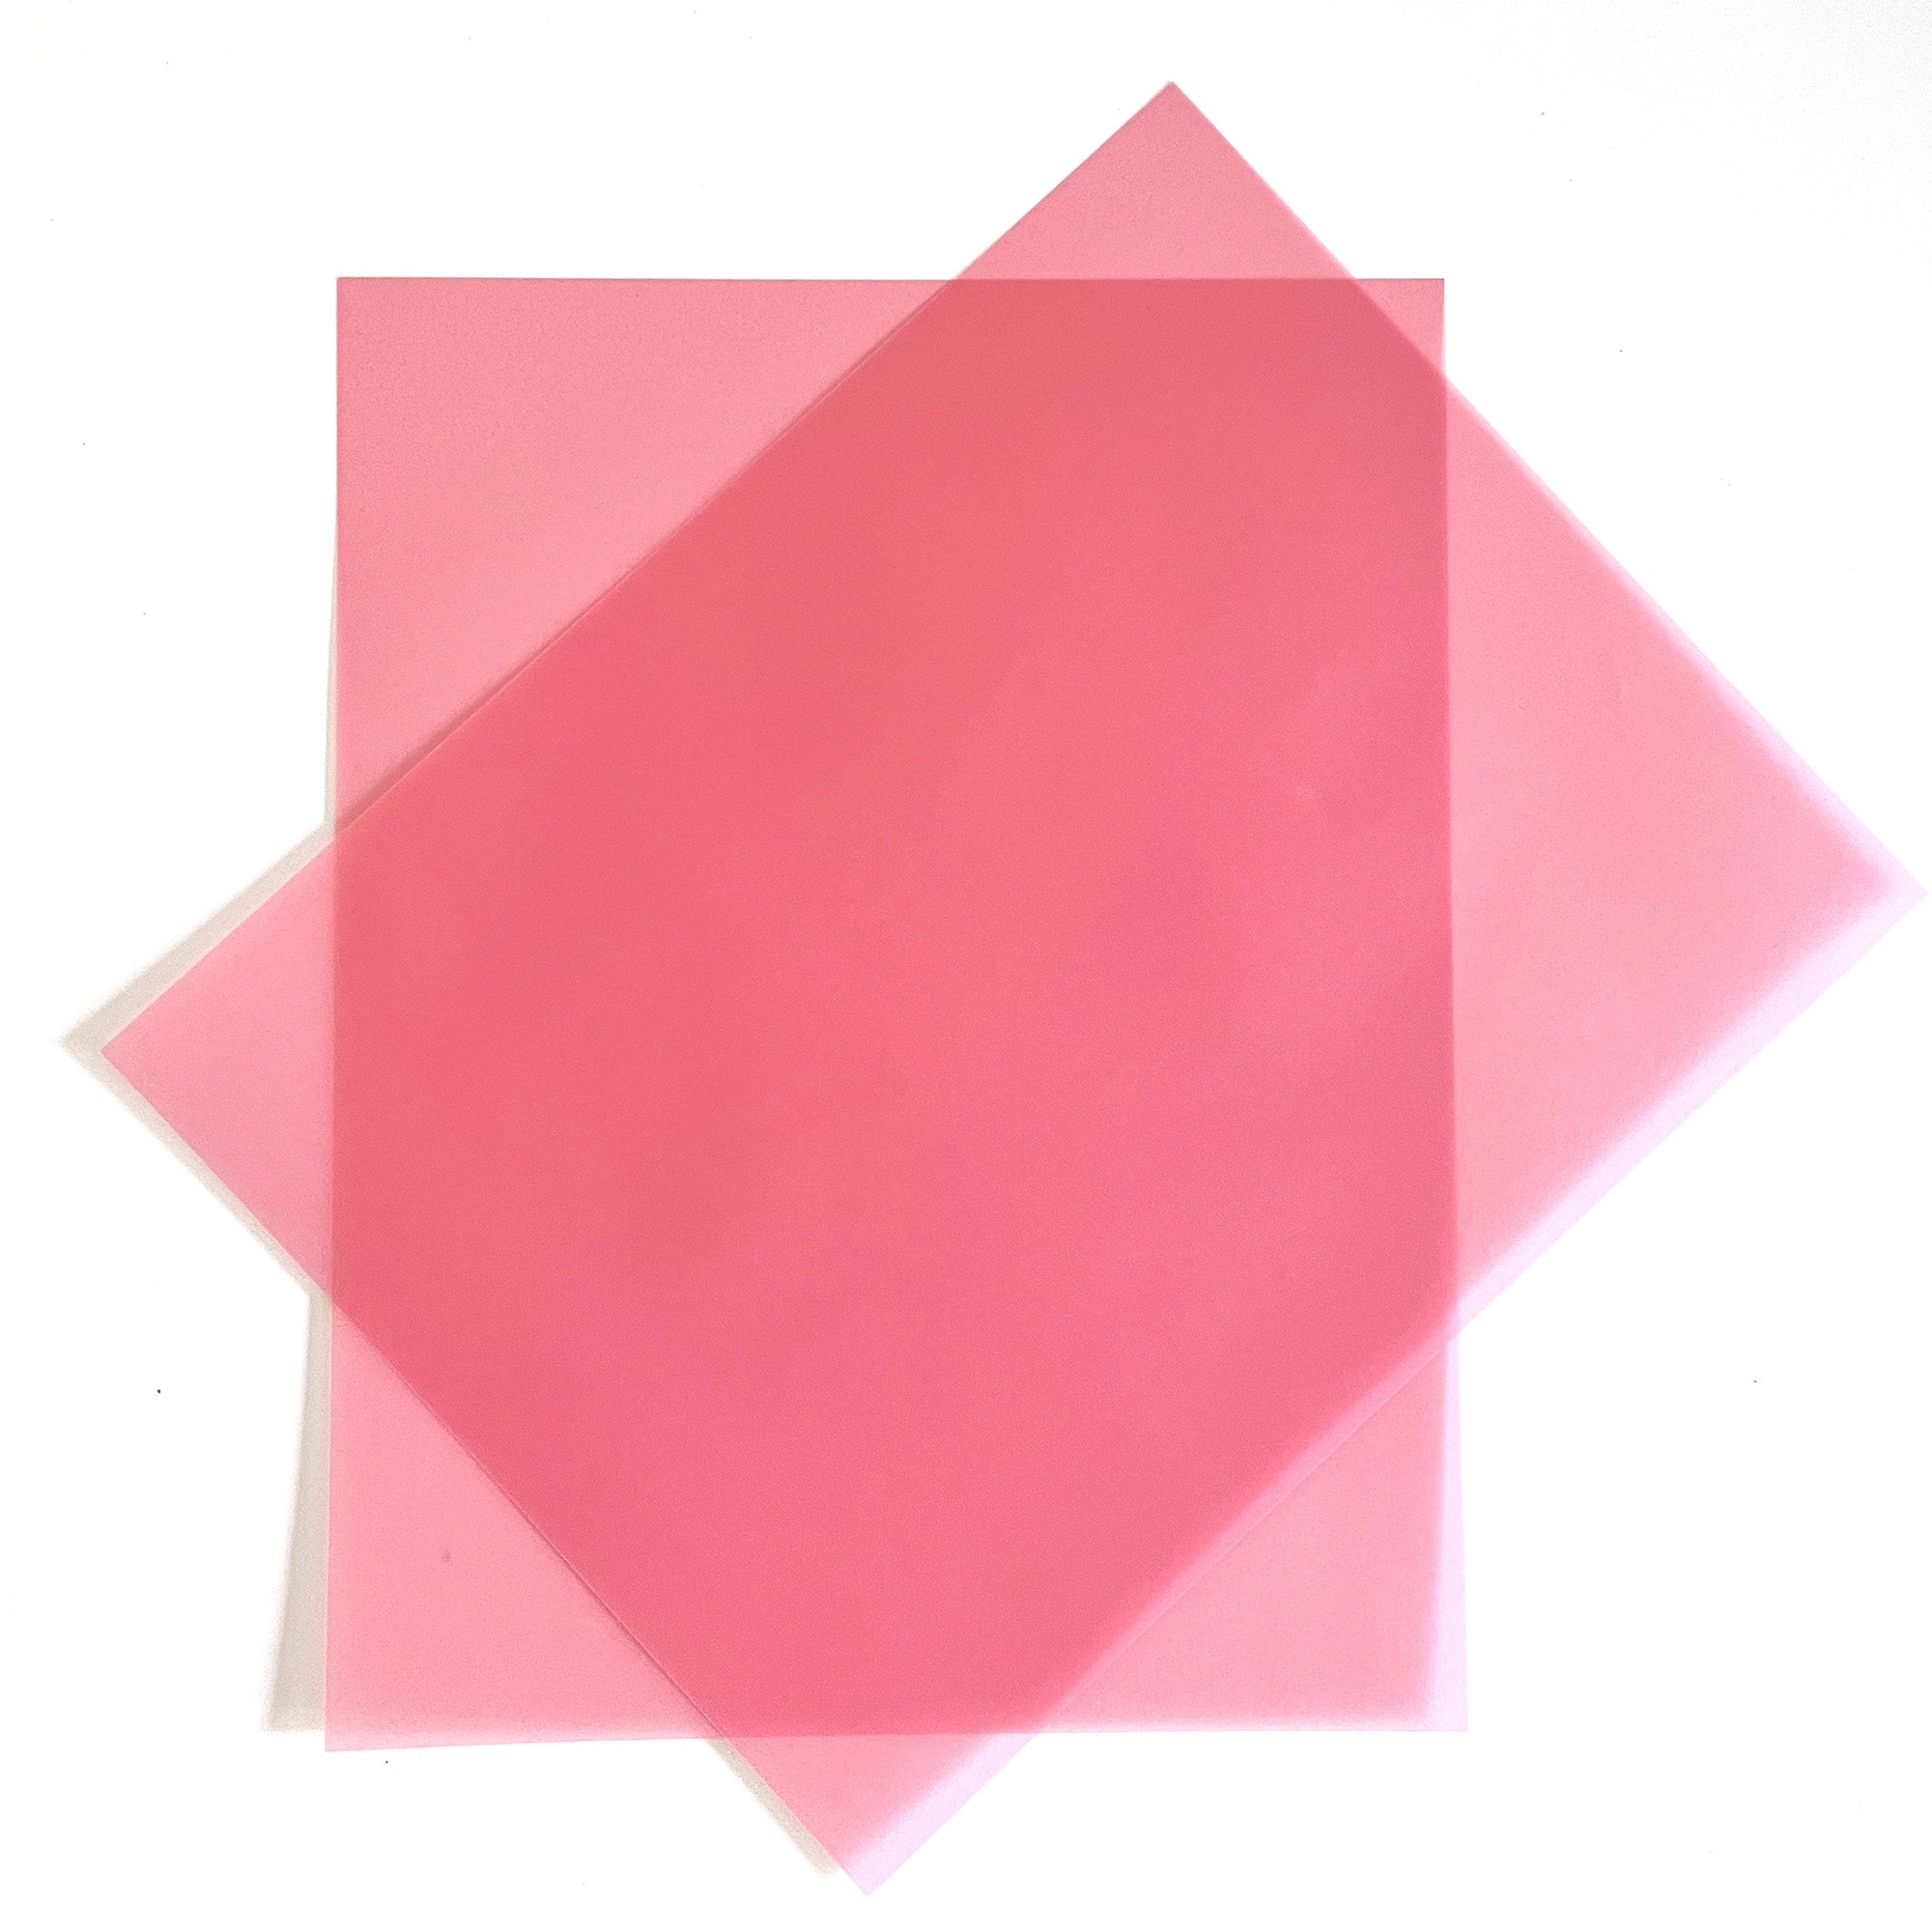 Pink Vellum Paper for Invitations and Tracing (8.5 x 11 in, 50